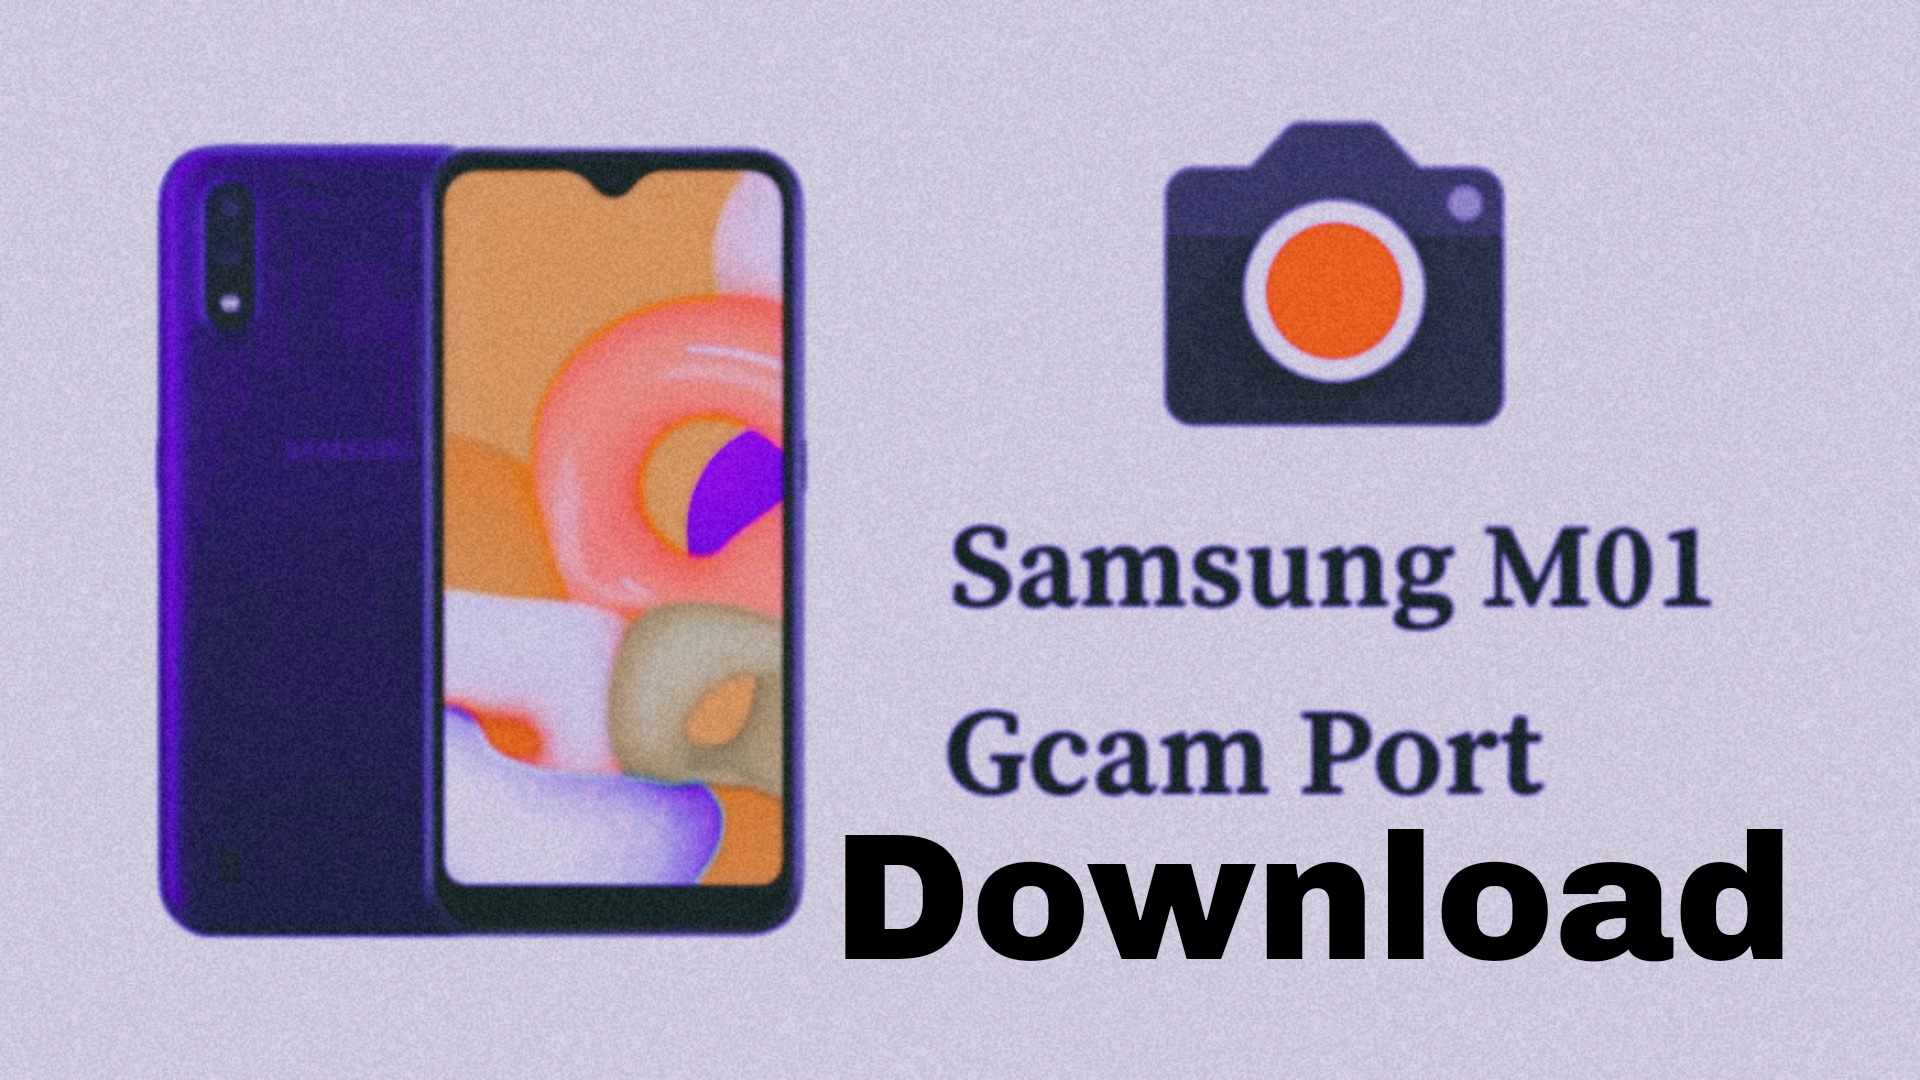 samsung m01 core flash file odin download without password